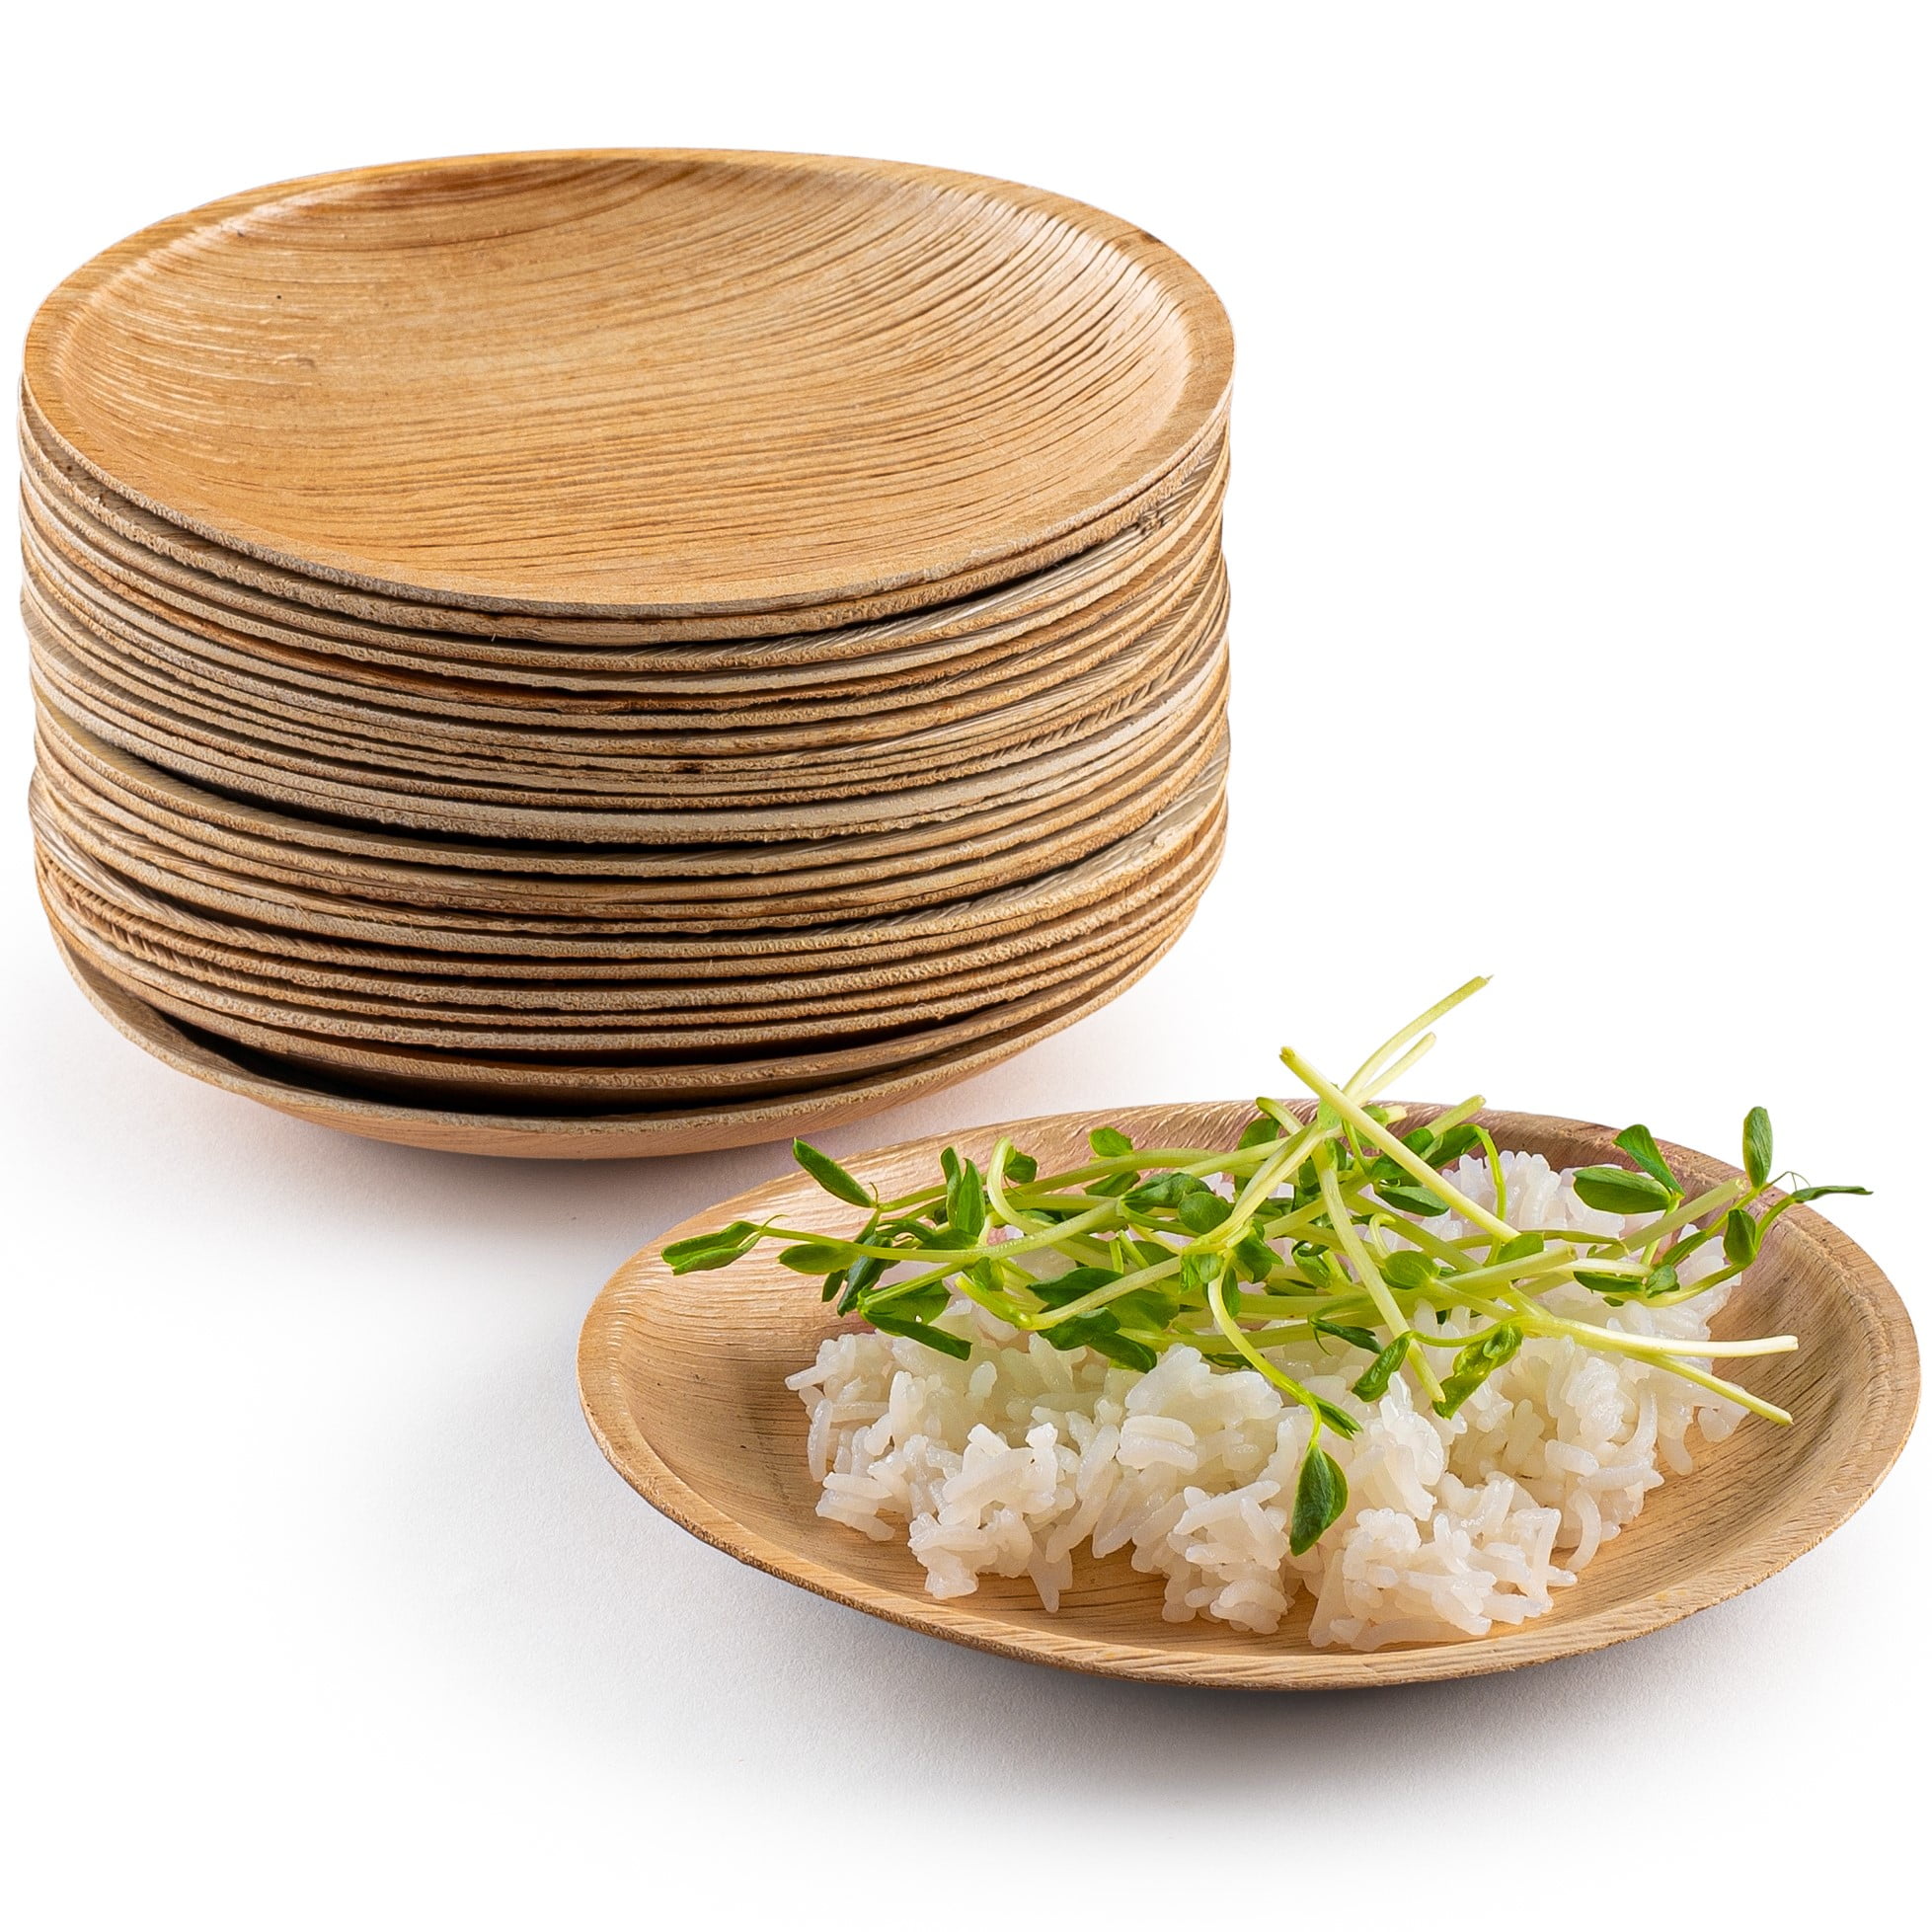 Reusable Bamboo Tableware That Looks Like Disposable Paper